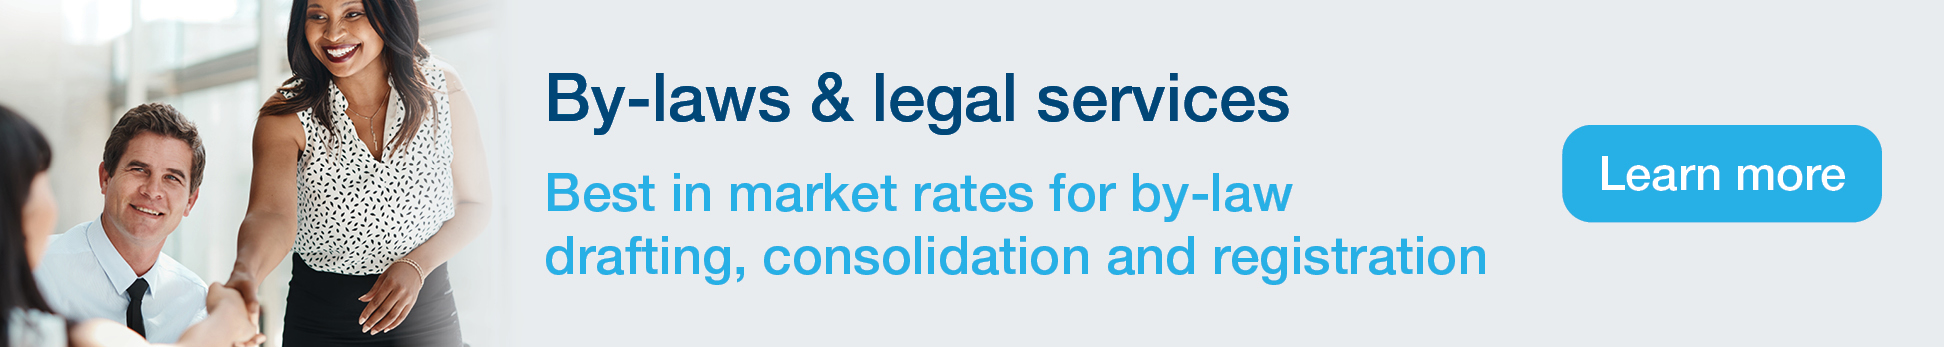 By-laws and legal services promotional banner